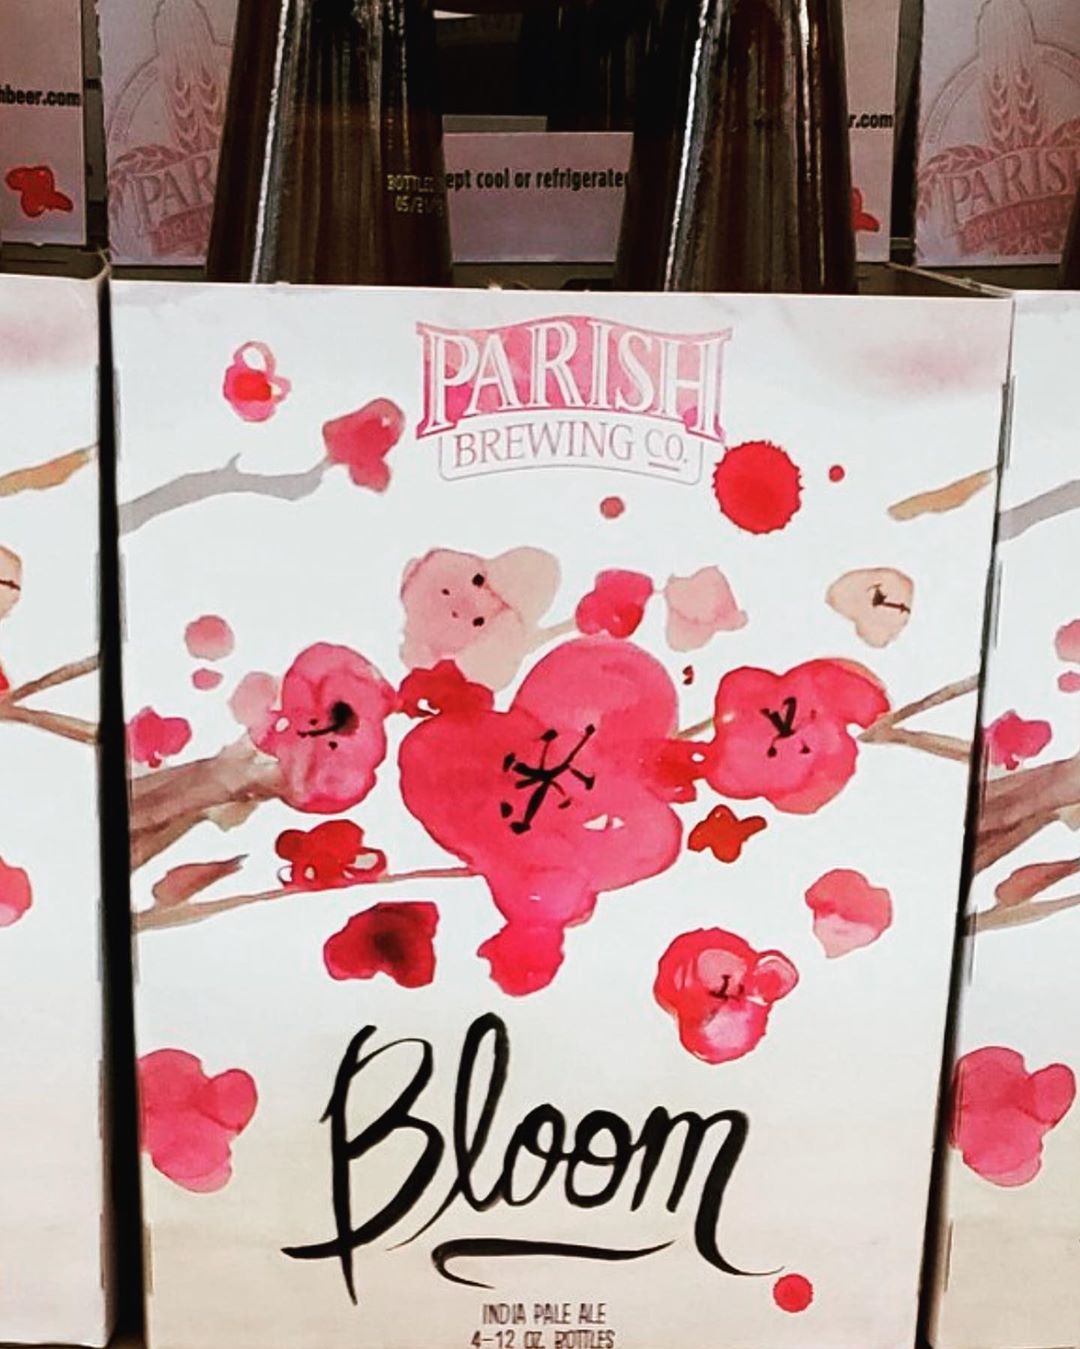 @parishbrewingco Bloom is now in stock at our Perkins Rd location! #beer #drinklocal #haze #summertime…